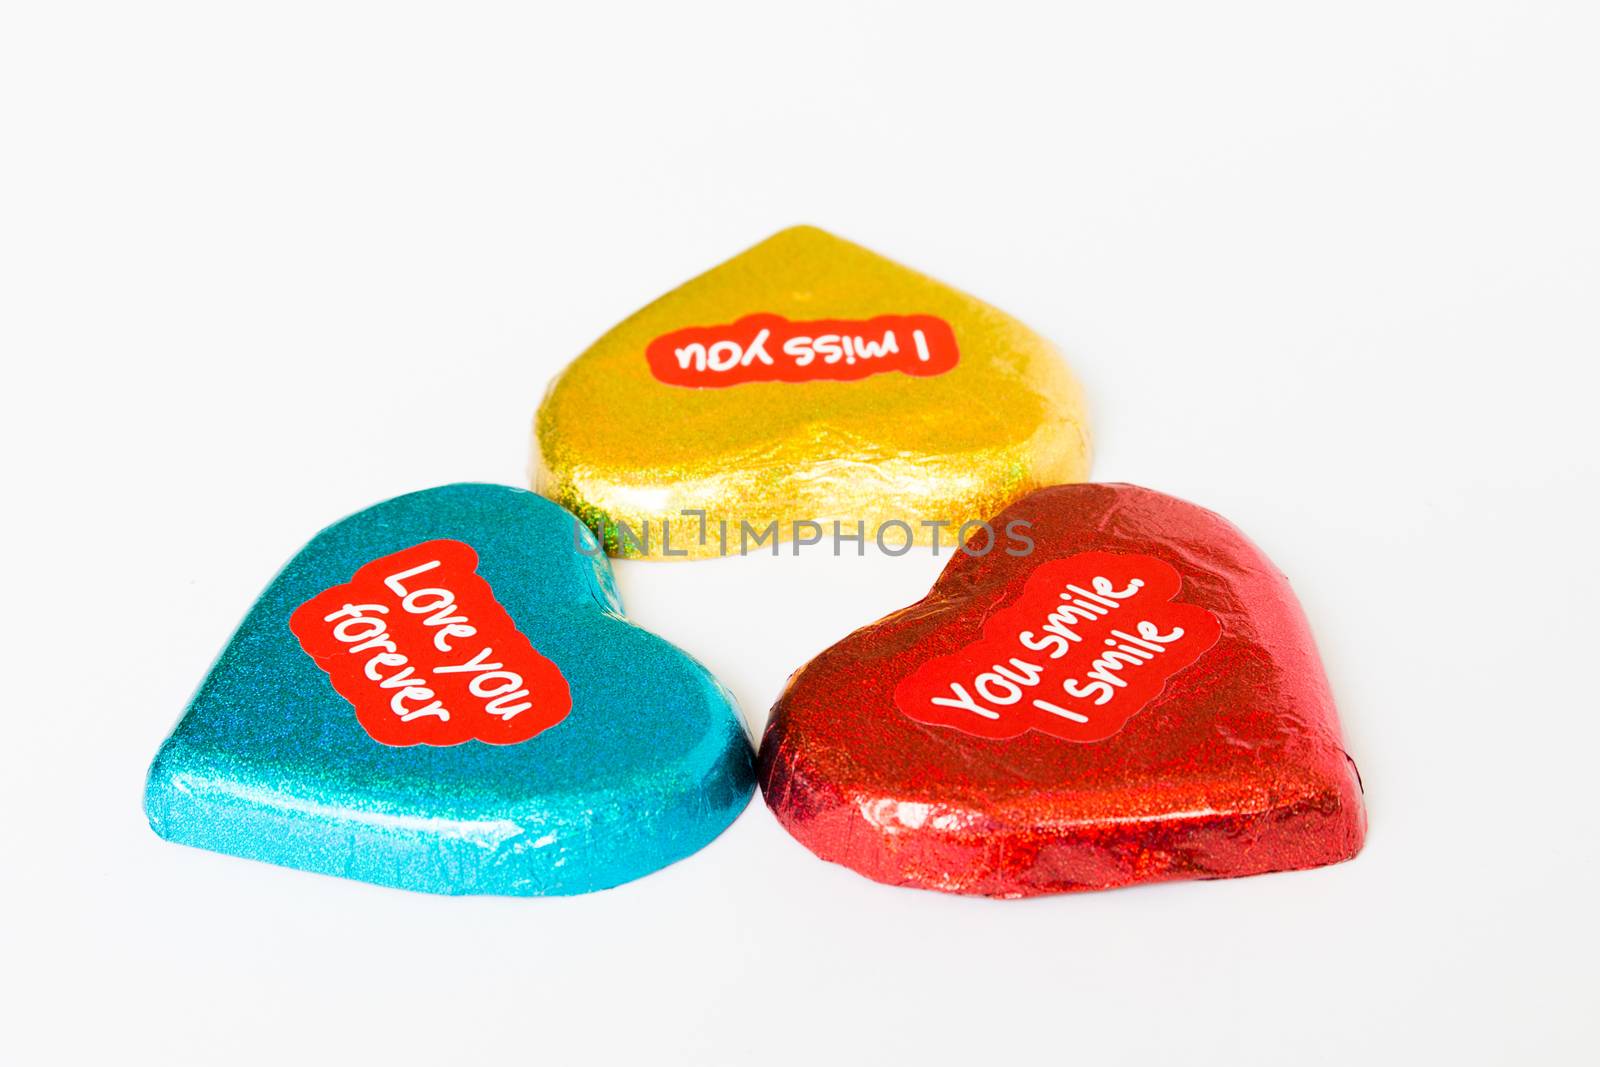 Chocolate wrapper  on Valentine's Day,colorful chocolate heart